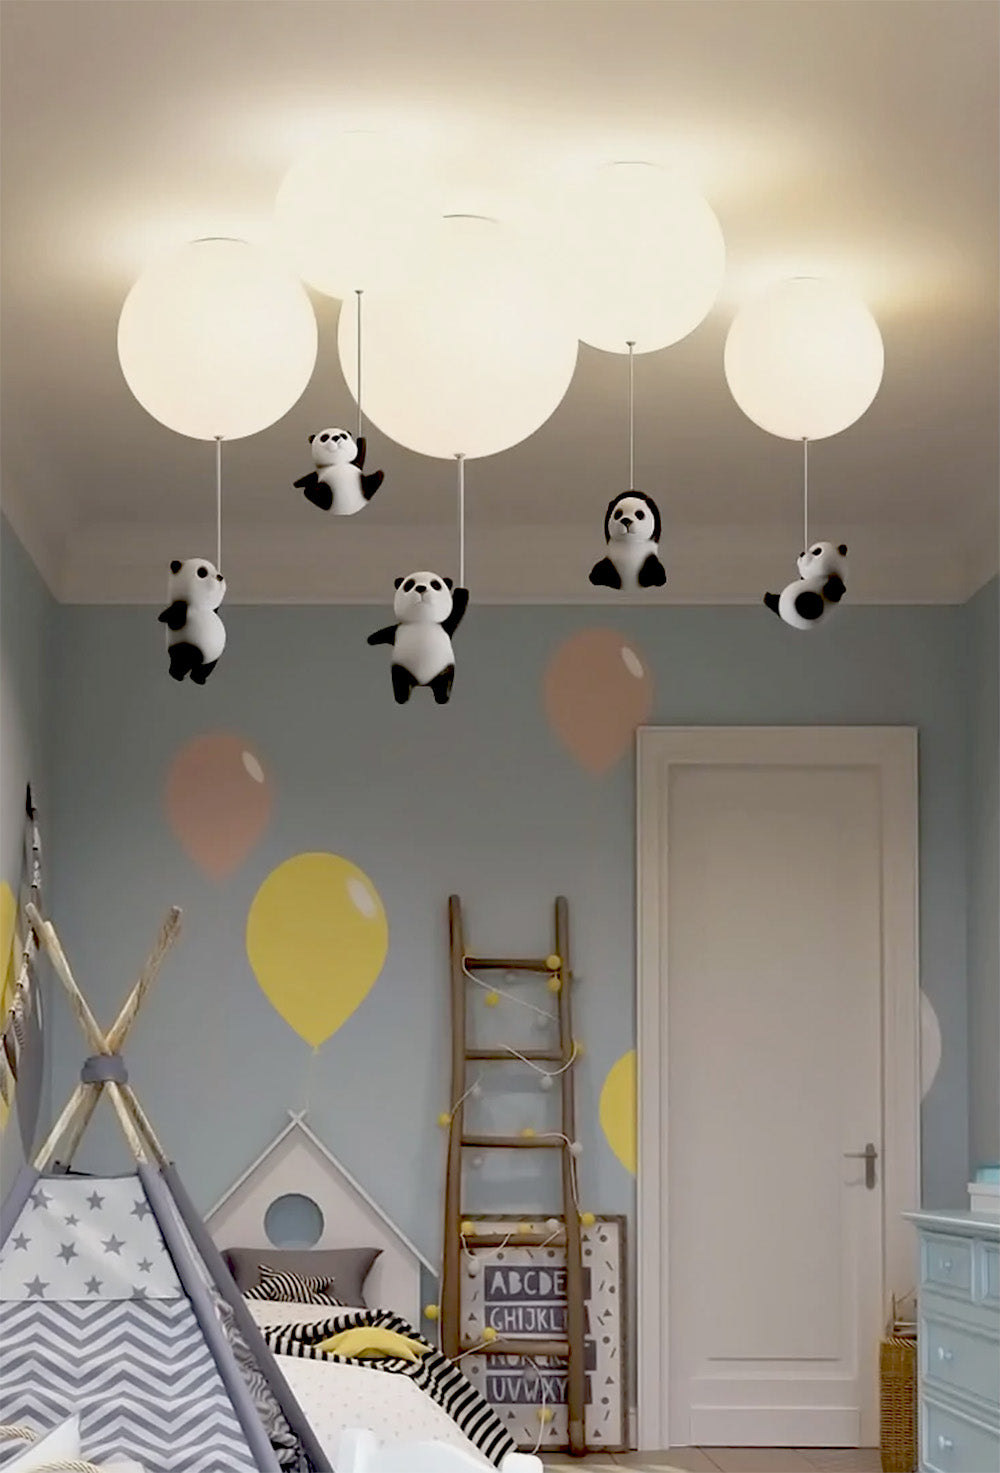 Panda Hanging from a Balloon Ceiling Lights